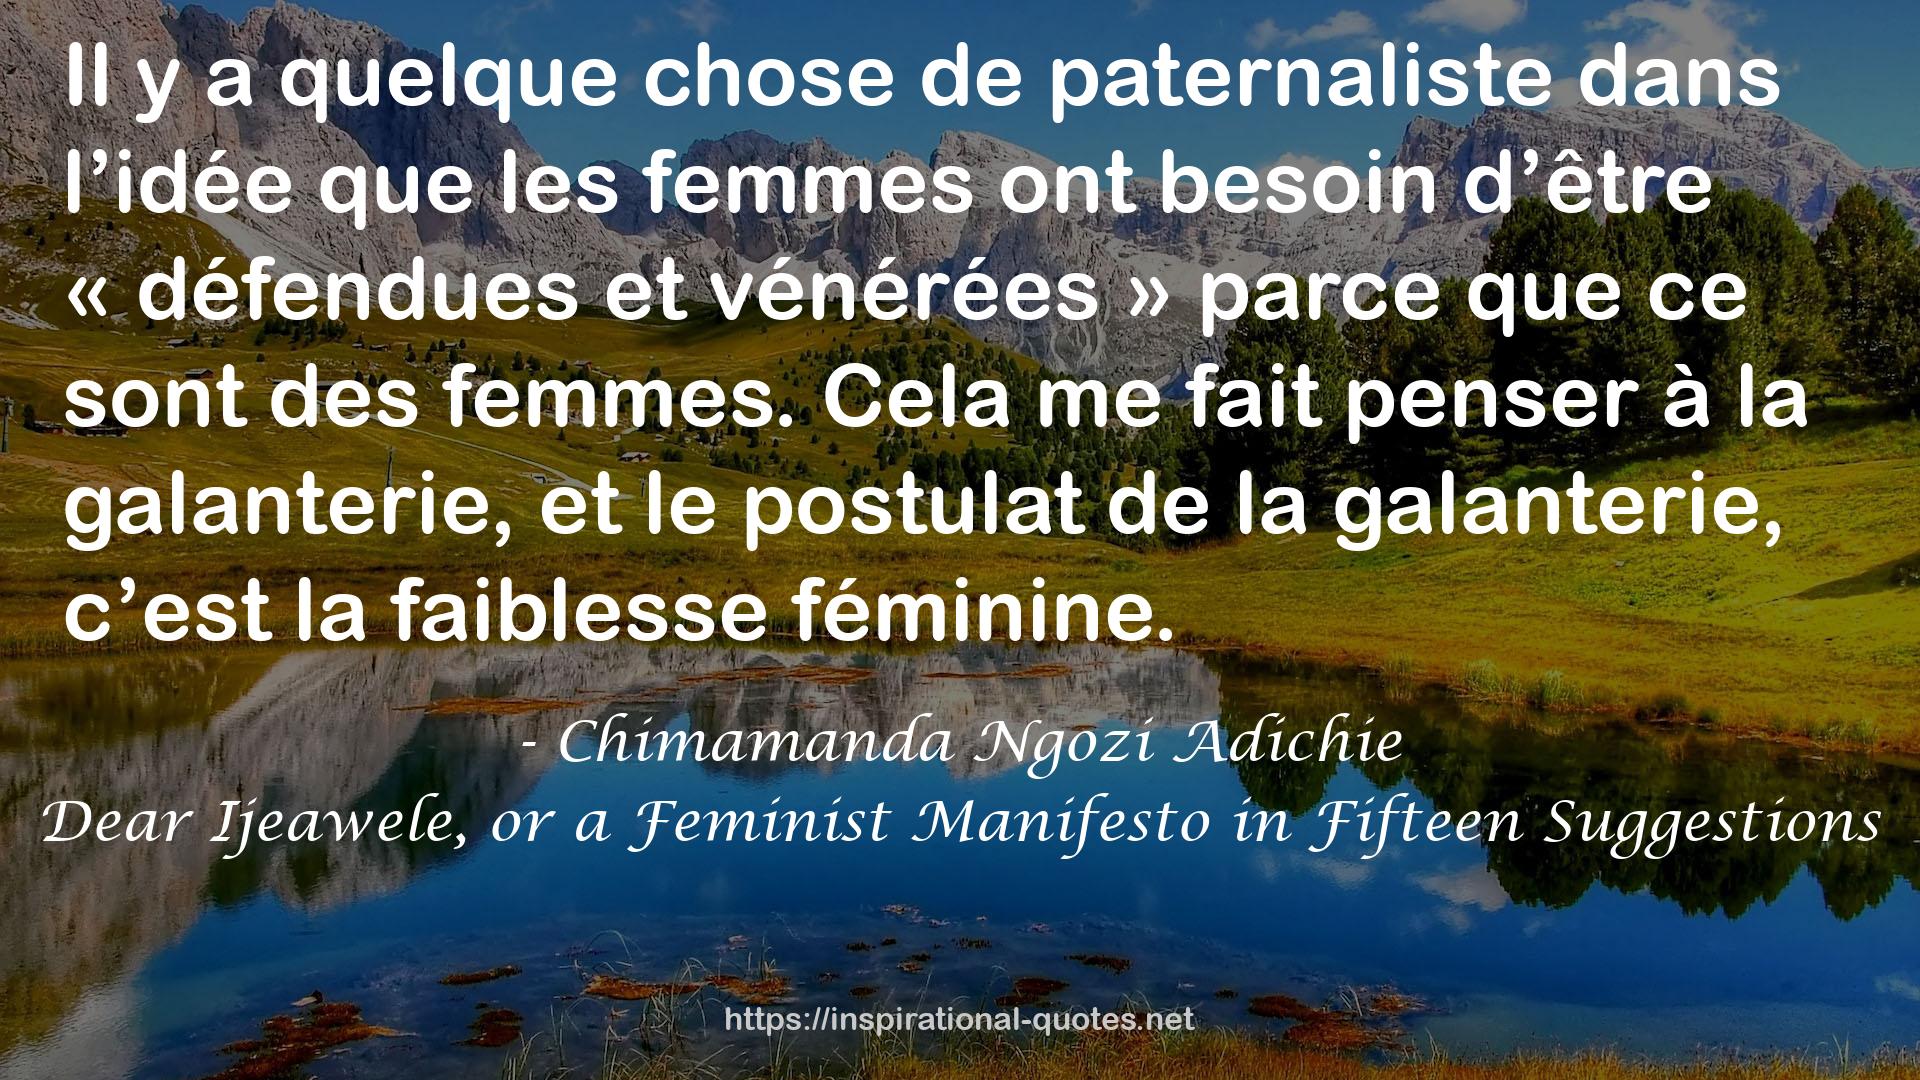 Dear Ijeawele, or a Feminist Manifesto in Fifteen Suggestions QUOTES